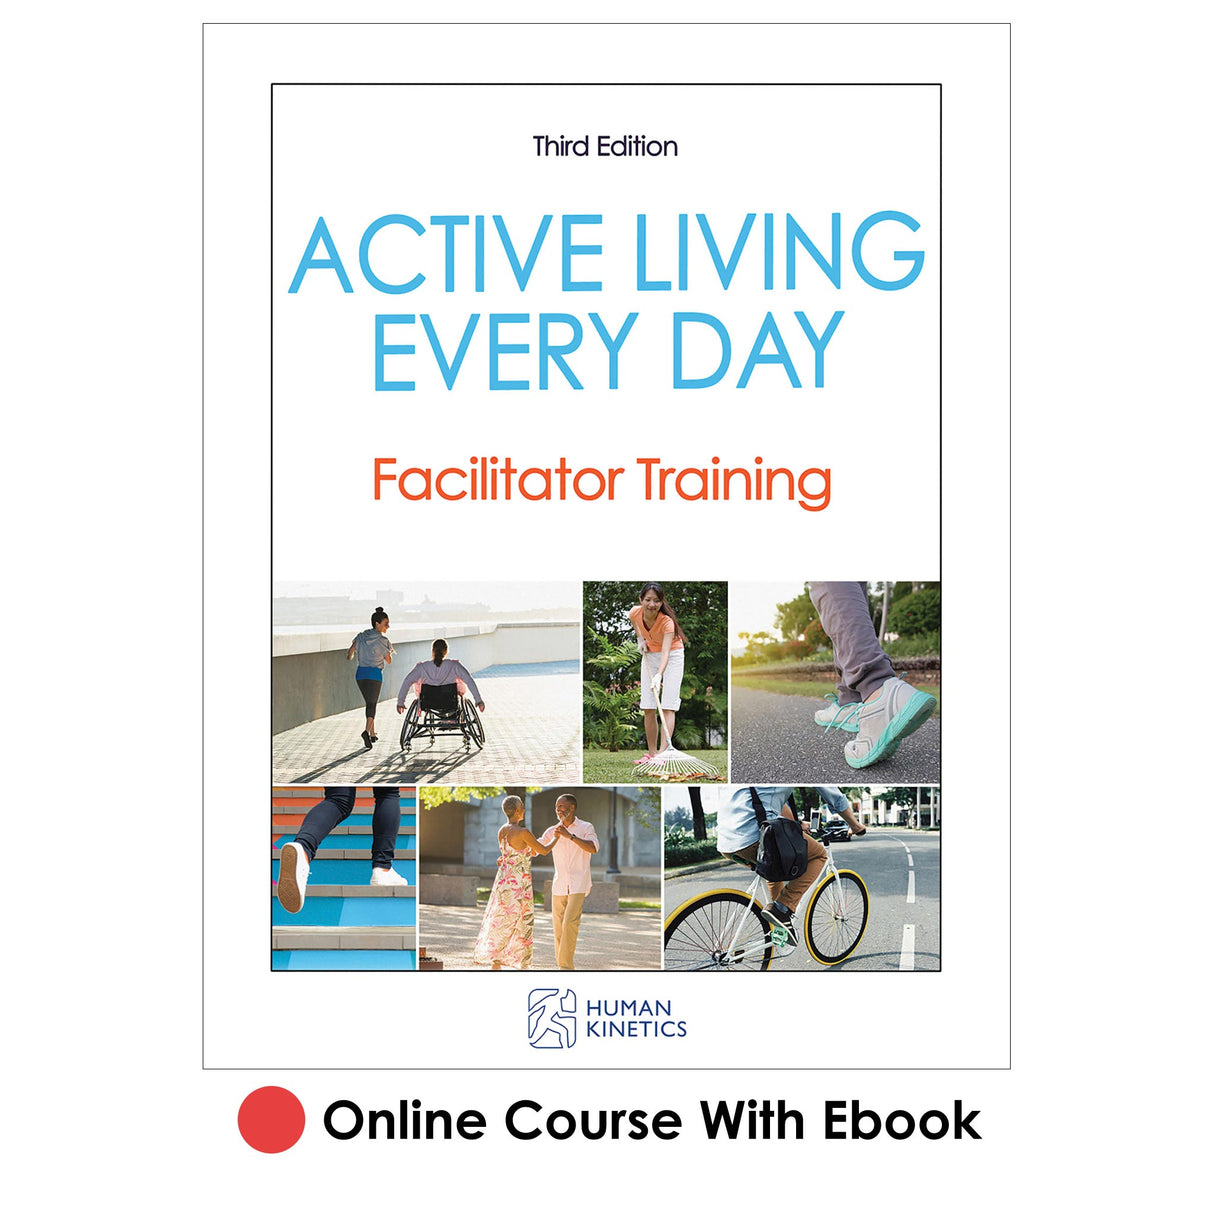 Active Living Every Day 3rd Edition Online Facilitator Training/CE Course With Ebook